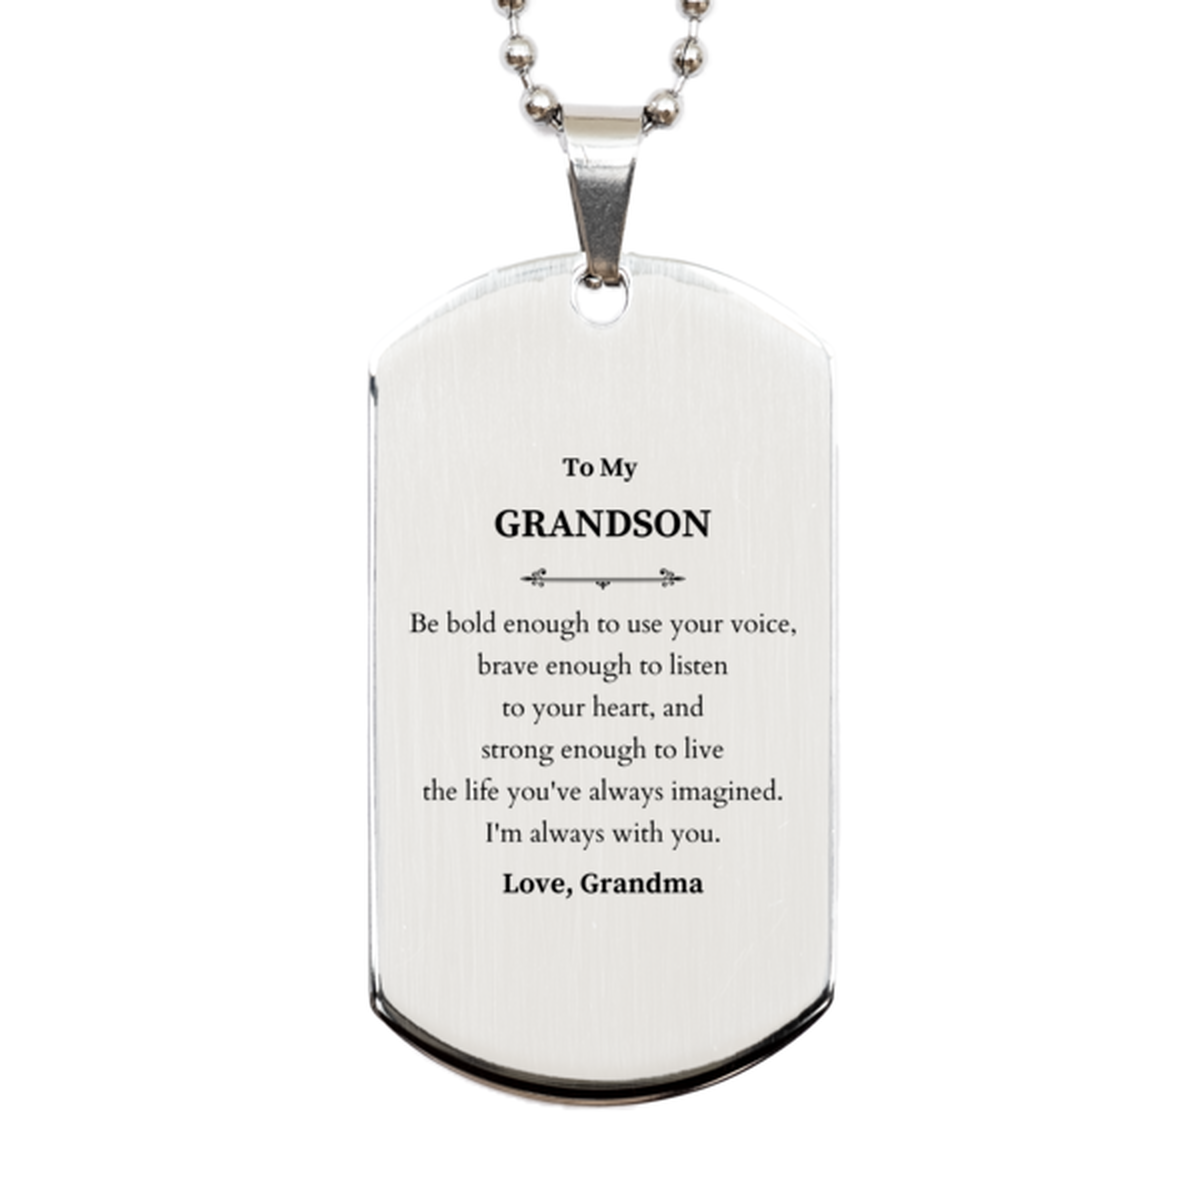 Keepsake Grandson Silver Dog Tag Gift Idea Graduation Christmas Birthday Grandson from Grandma, Grandson Be bold enough to use your voice, brave enough to listen to your heart. Love, Grandma